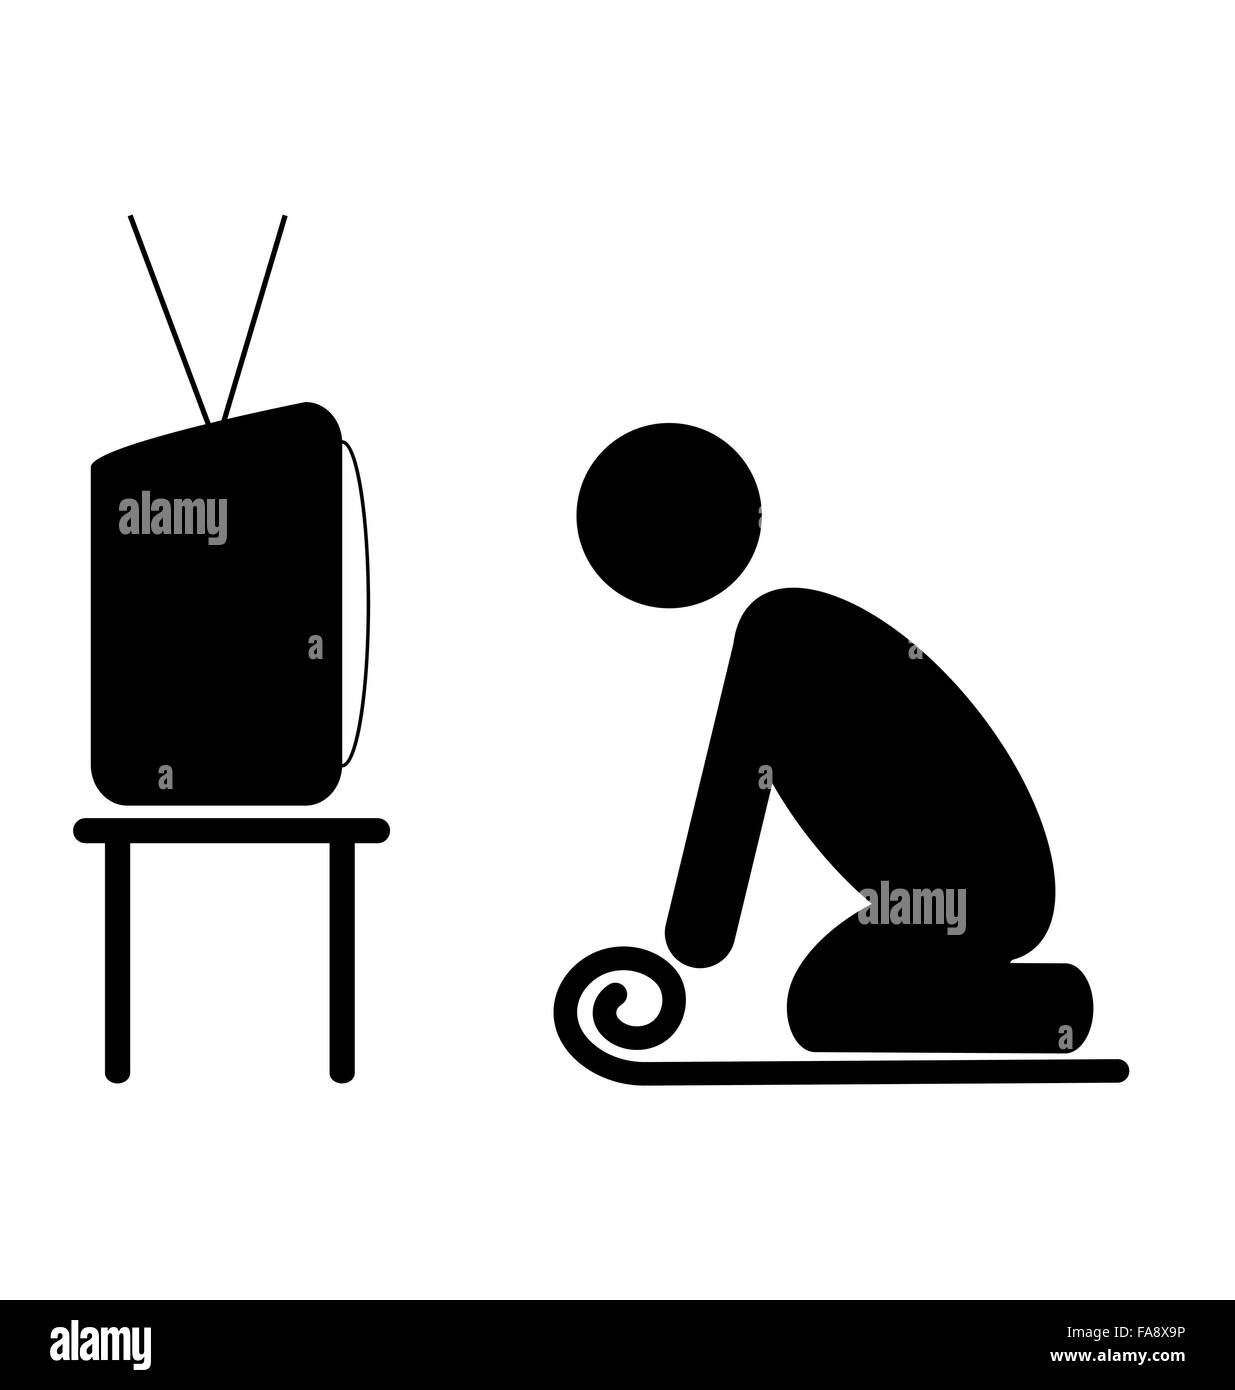 TV yoga tutorial lesson man pictogram flat icon isolated on whit Stock Vector